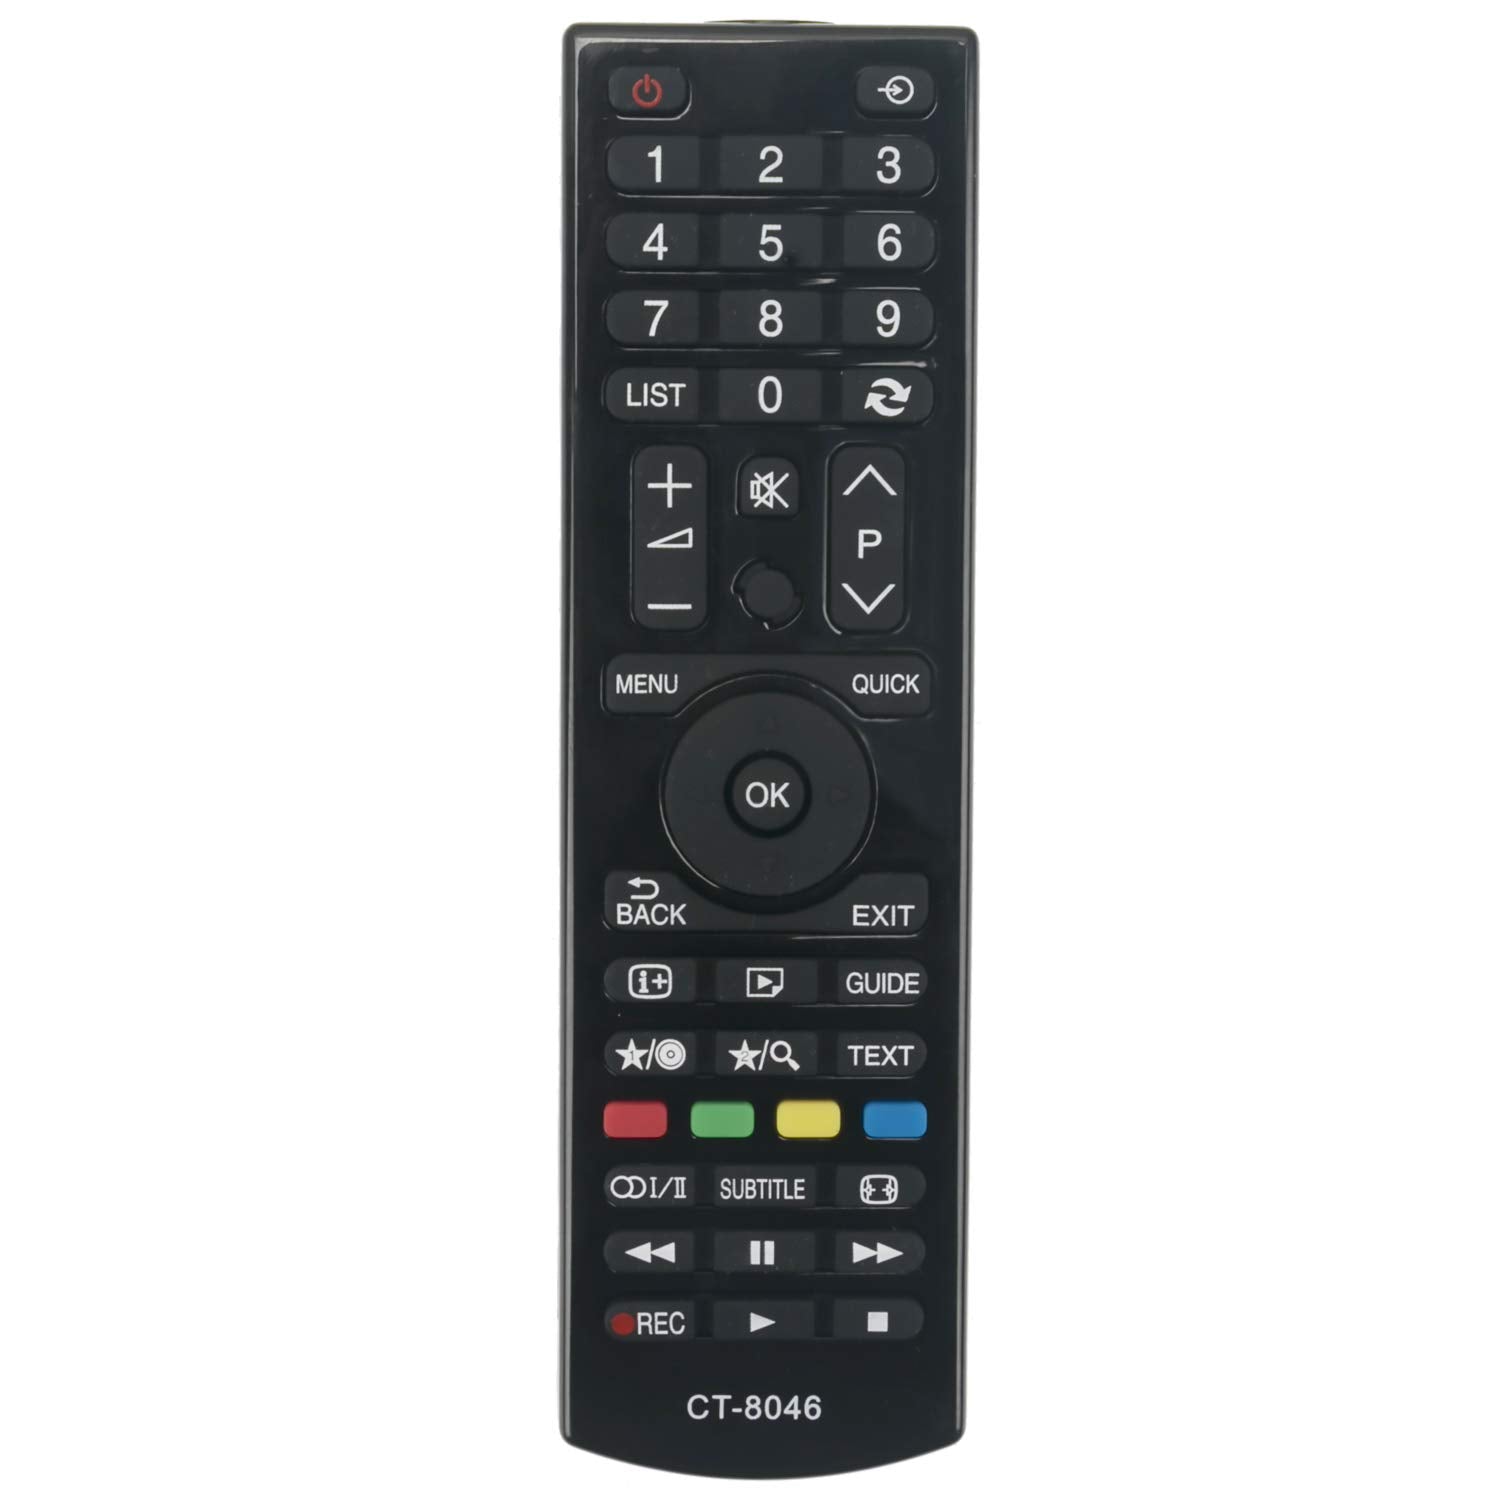 CT-8046 Remote Control Replacement for Toshiba TV CT8046 32W1633DB 40L1543DG